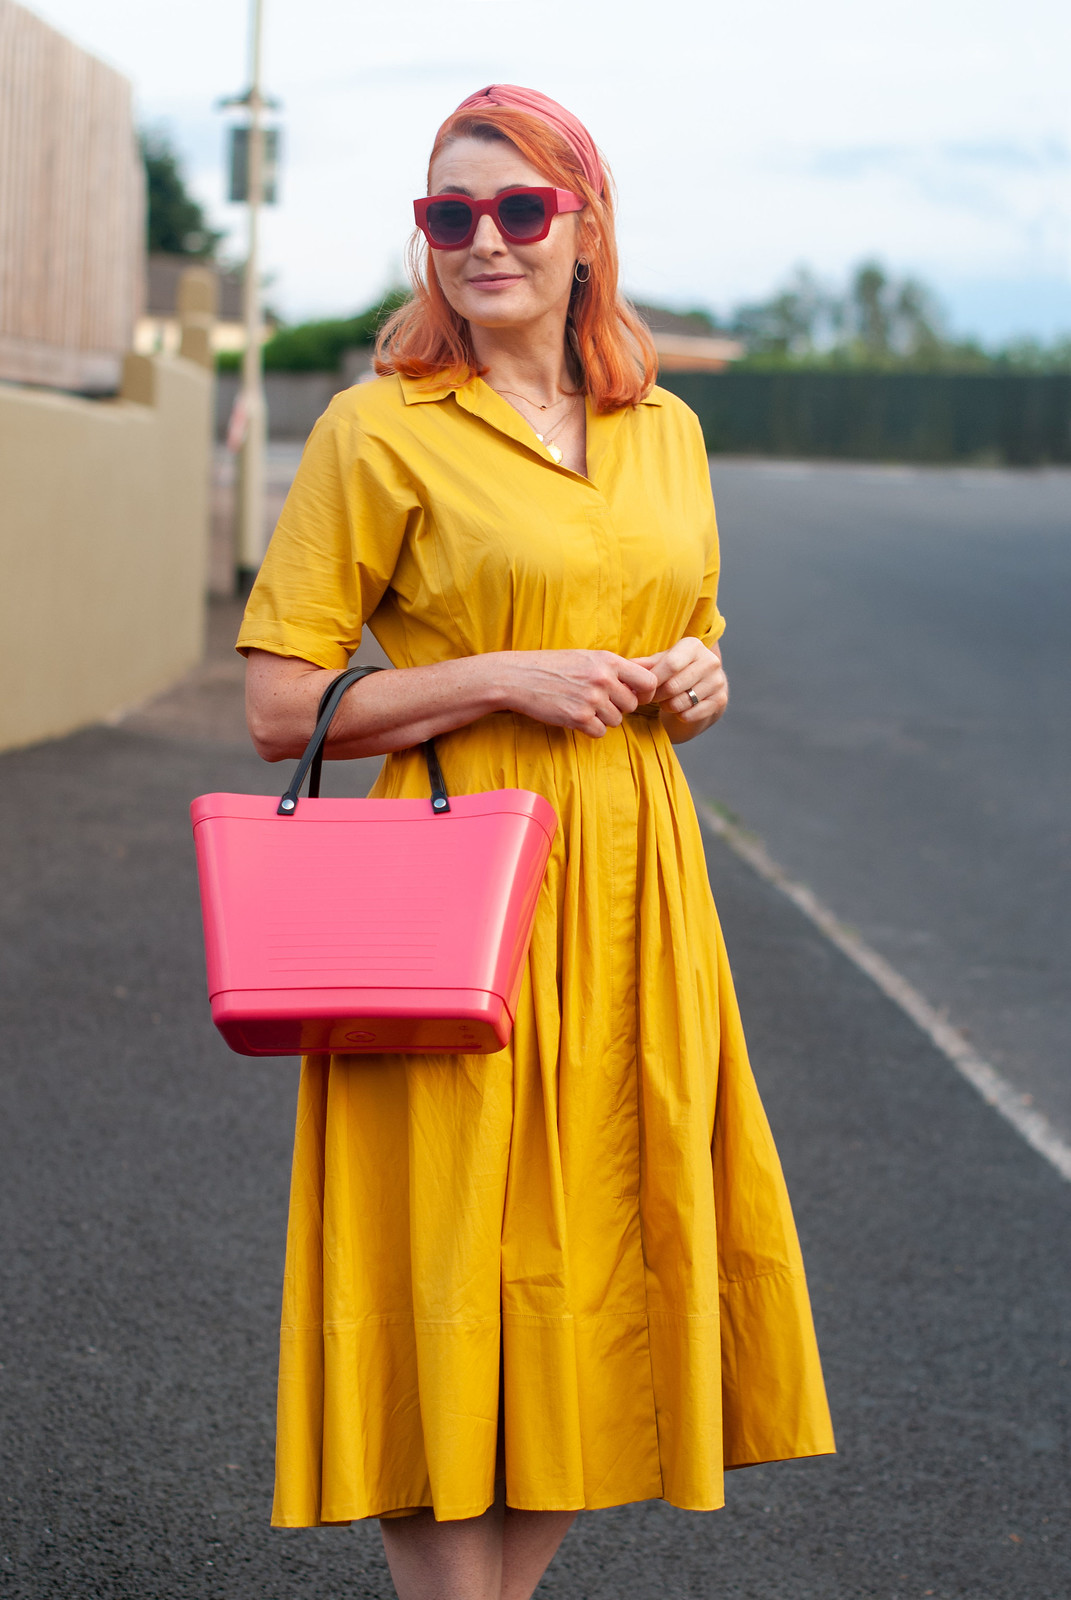 Over 40 fashion blogger Not Dressed As Lamb wearing a yellow summer dress in a shirt style \ red strappy block heels \ pink bucket bag \ pink headband \ red square sunglasses